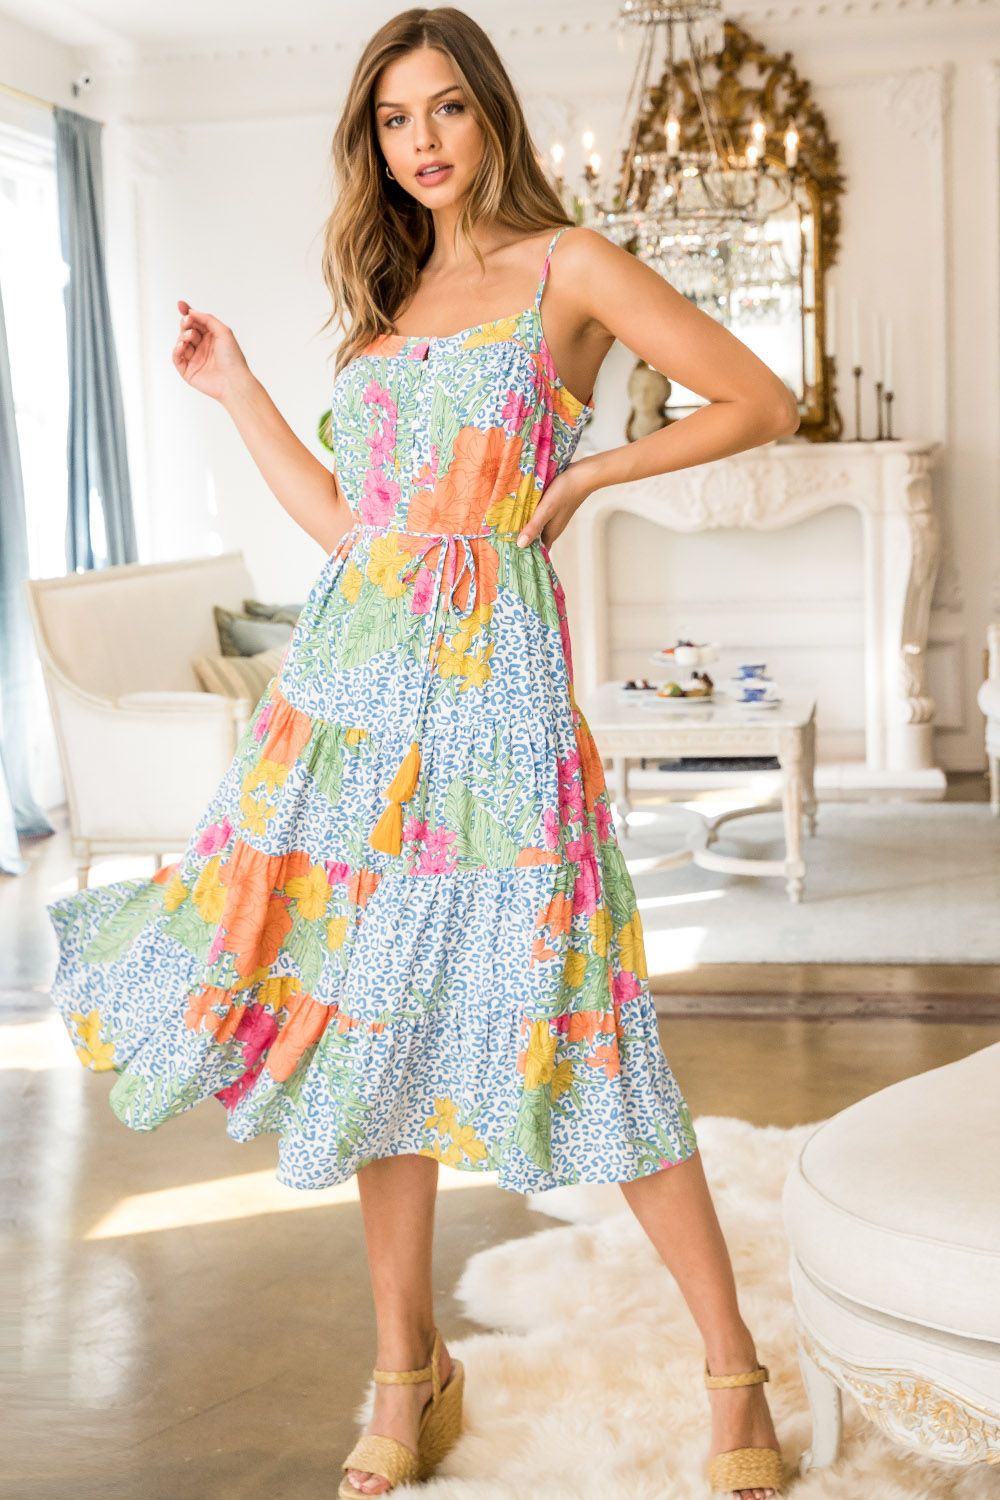 Imagine wearing this pretty summer dress to summer parties, pool gatherings or times at the beach.  The lovely abstract floral and animal print spaghetti dress is an easy style to wear when you want to keep cool while staying fashionable.  The details set this summer dress apart from the rest.